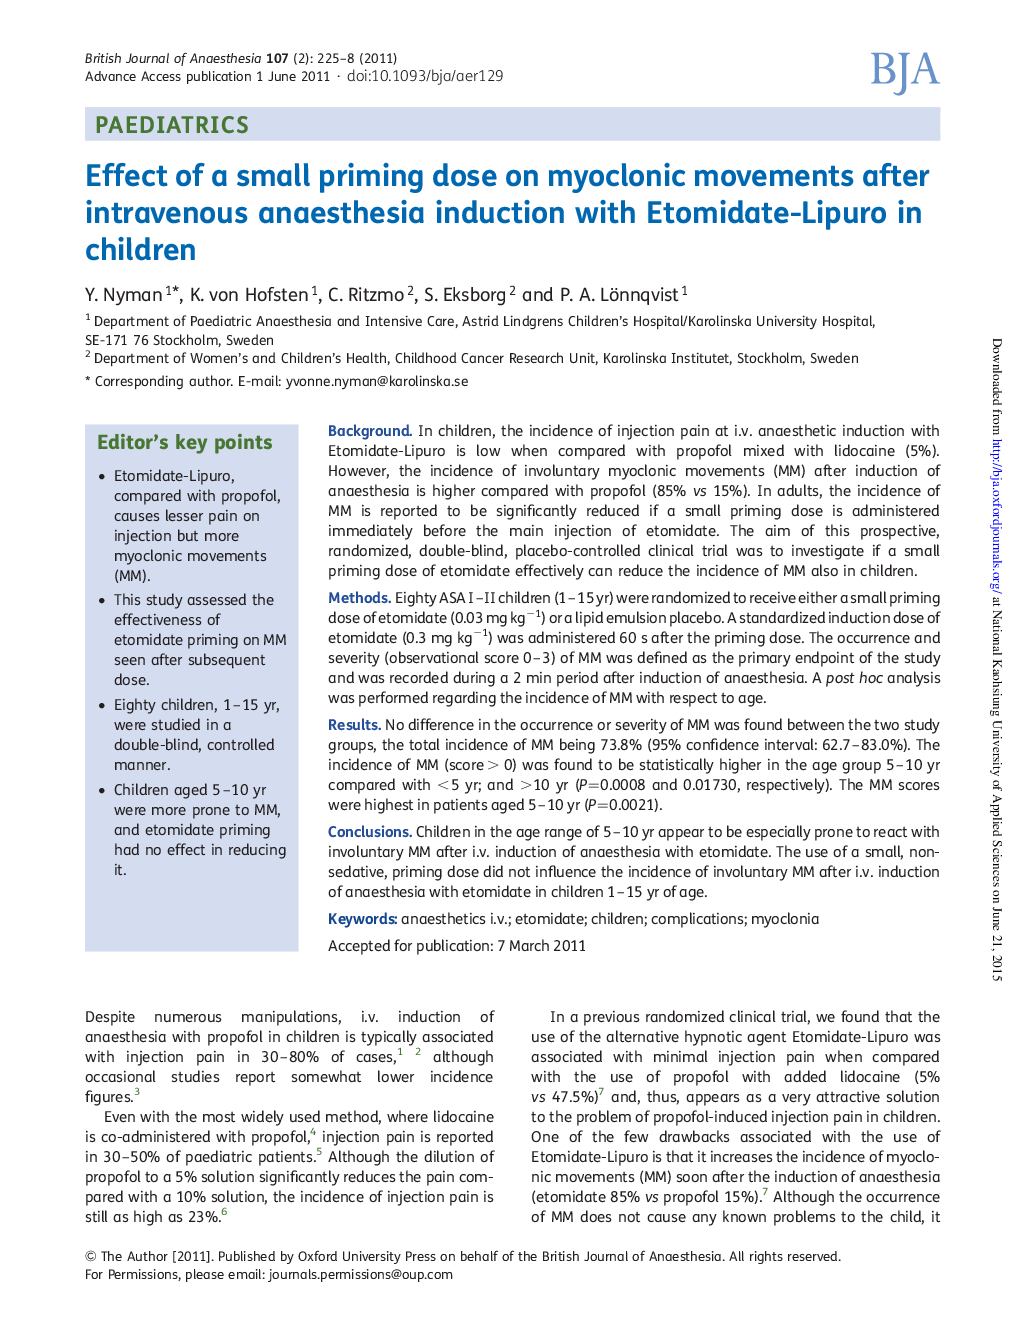 Effect of a small priming dose on myoclonic movements after intravenous anaesthesia induction with Etomidate-Lipuro in children